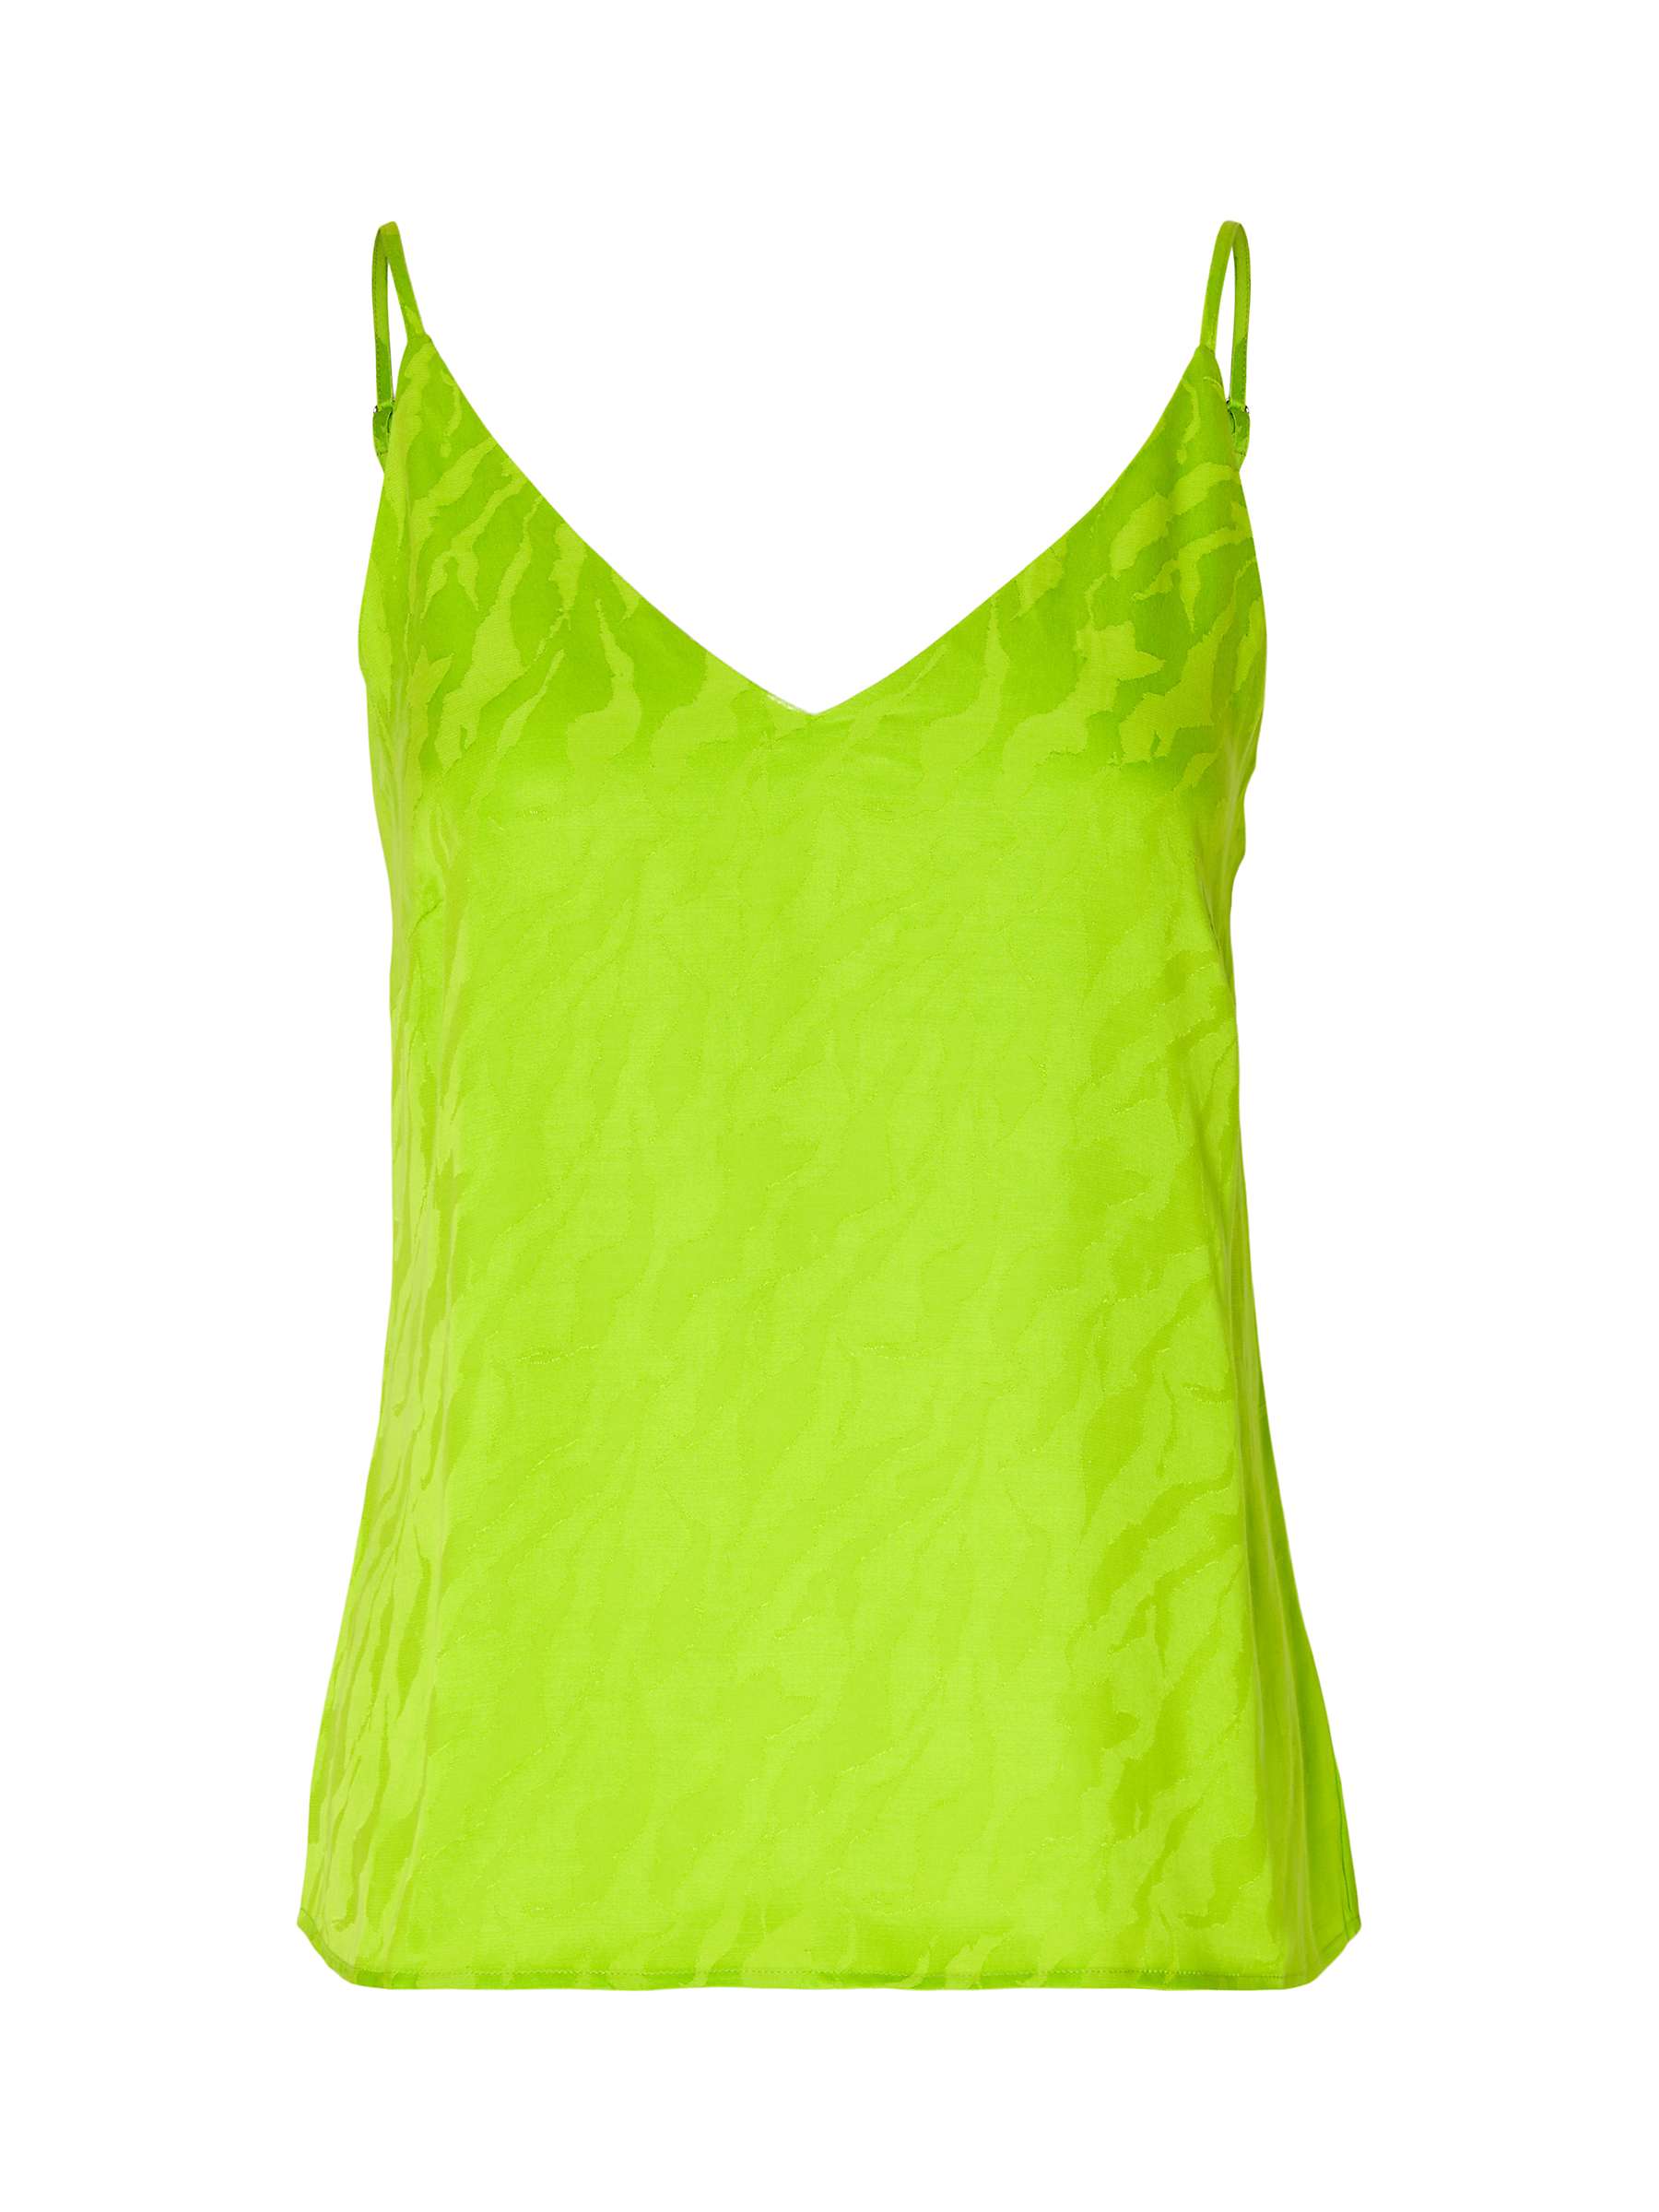 Buy SELECTED FEMME Constanza Camisole Top, Lime Green Online at johnlewis.com